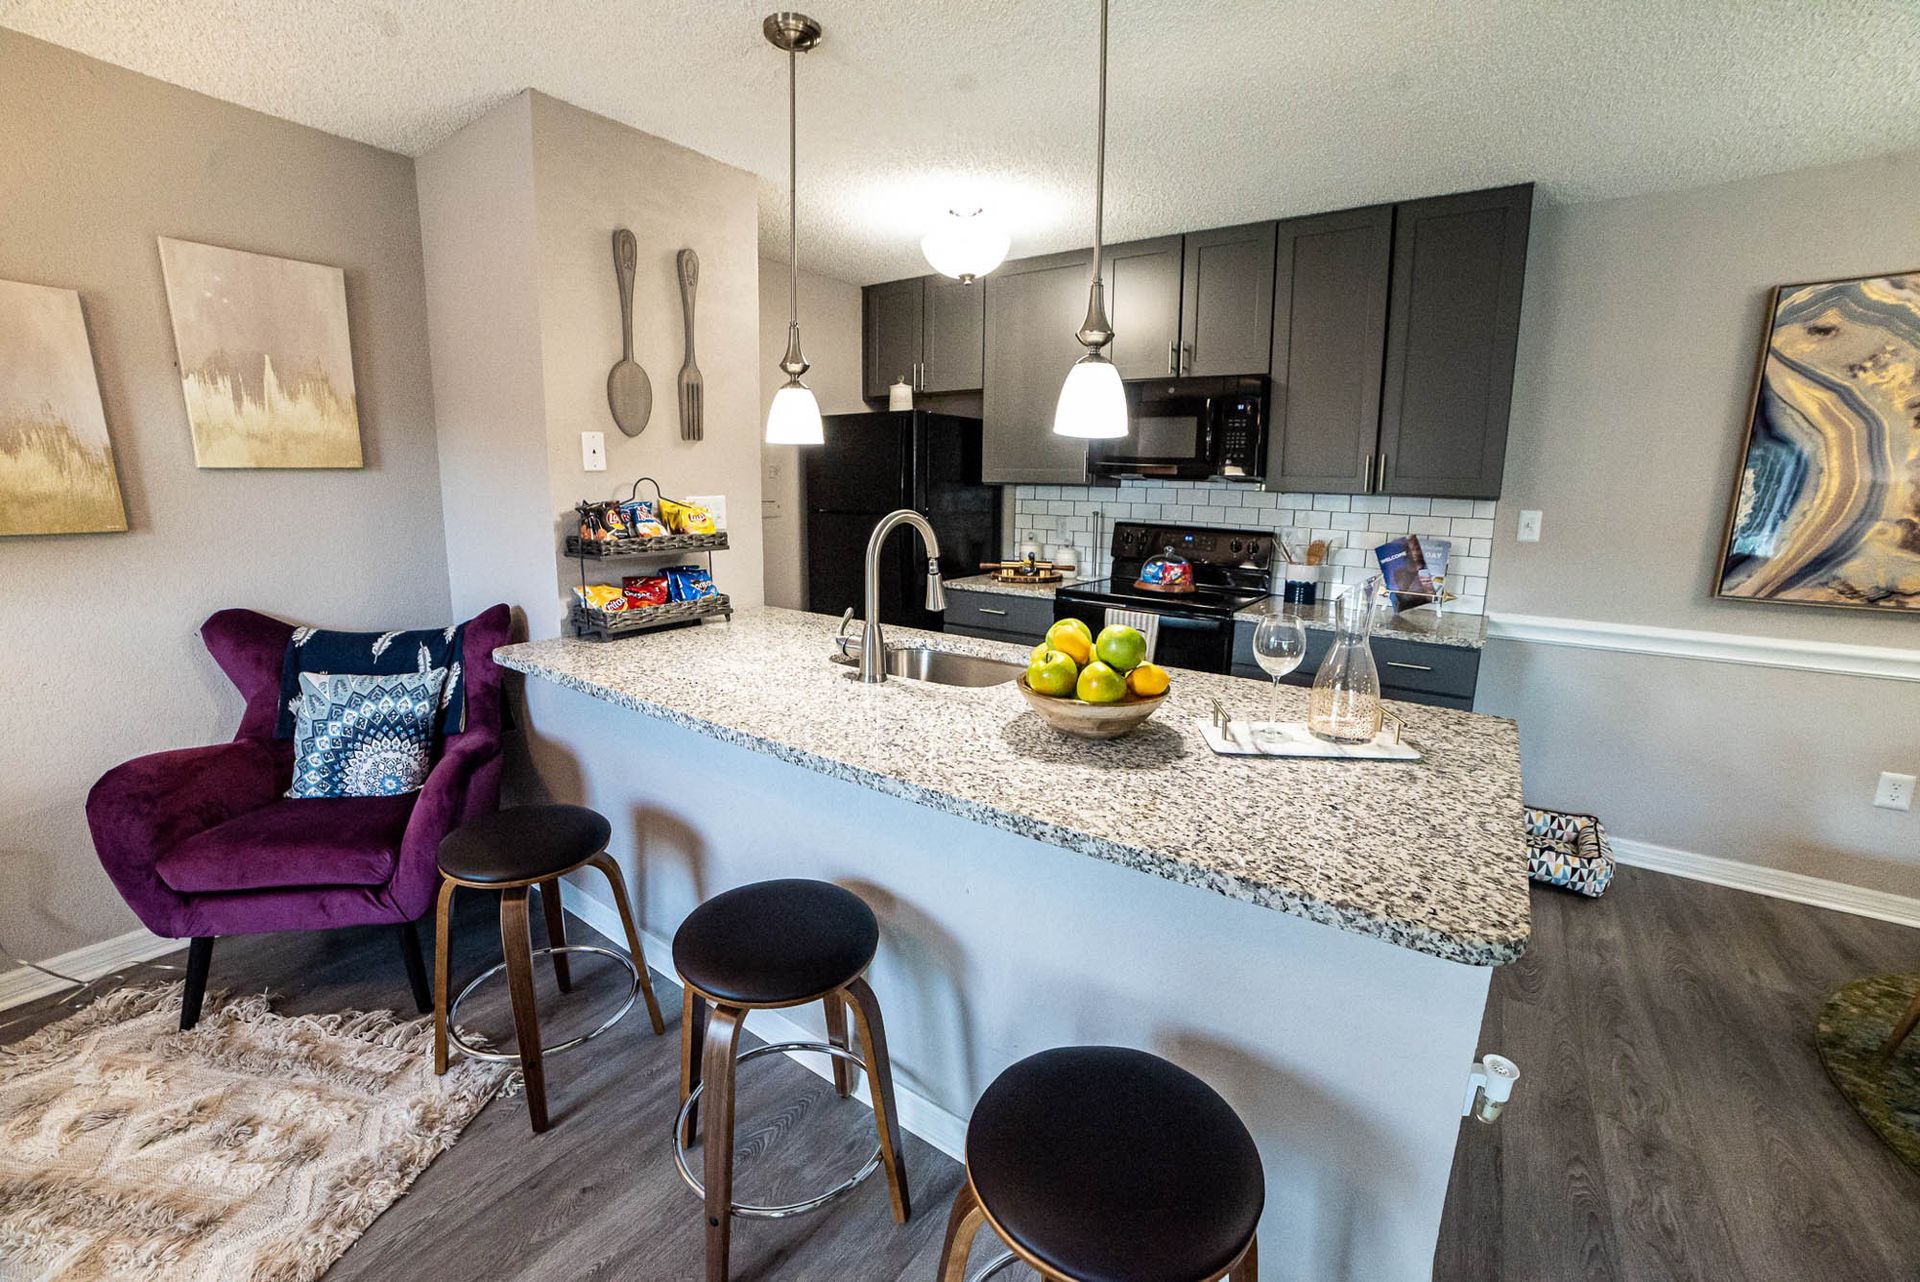 A kitchen with granite counter tops and a purple chair at Trellis at The Lakes.